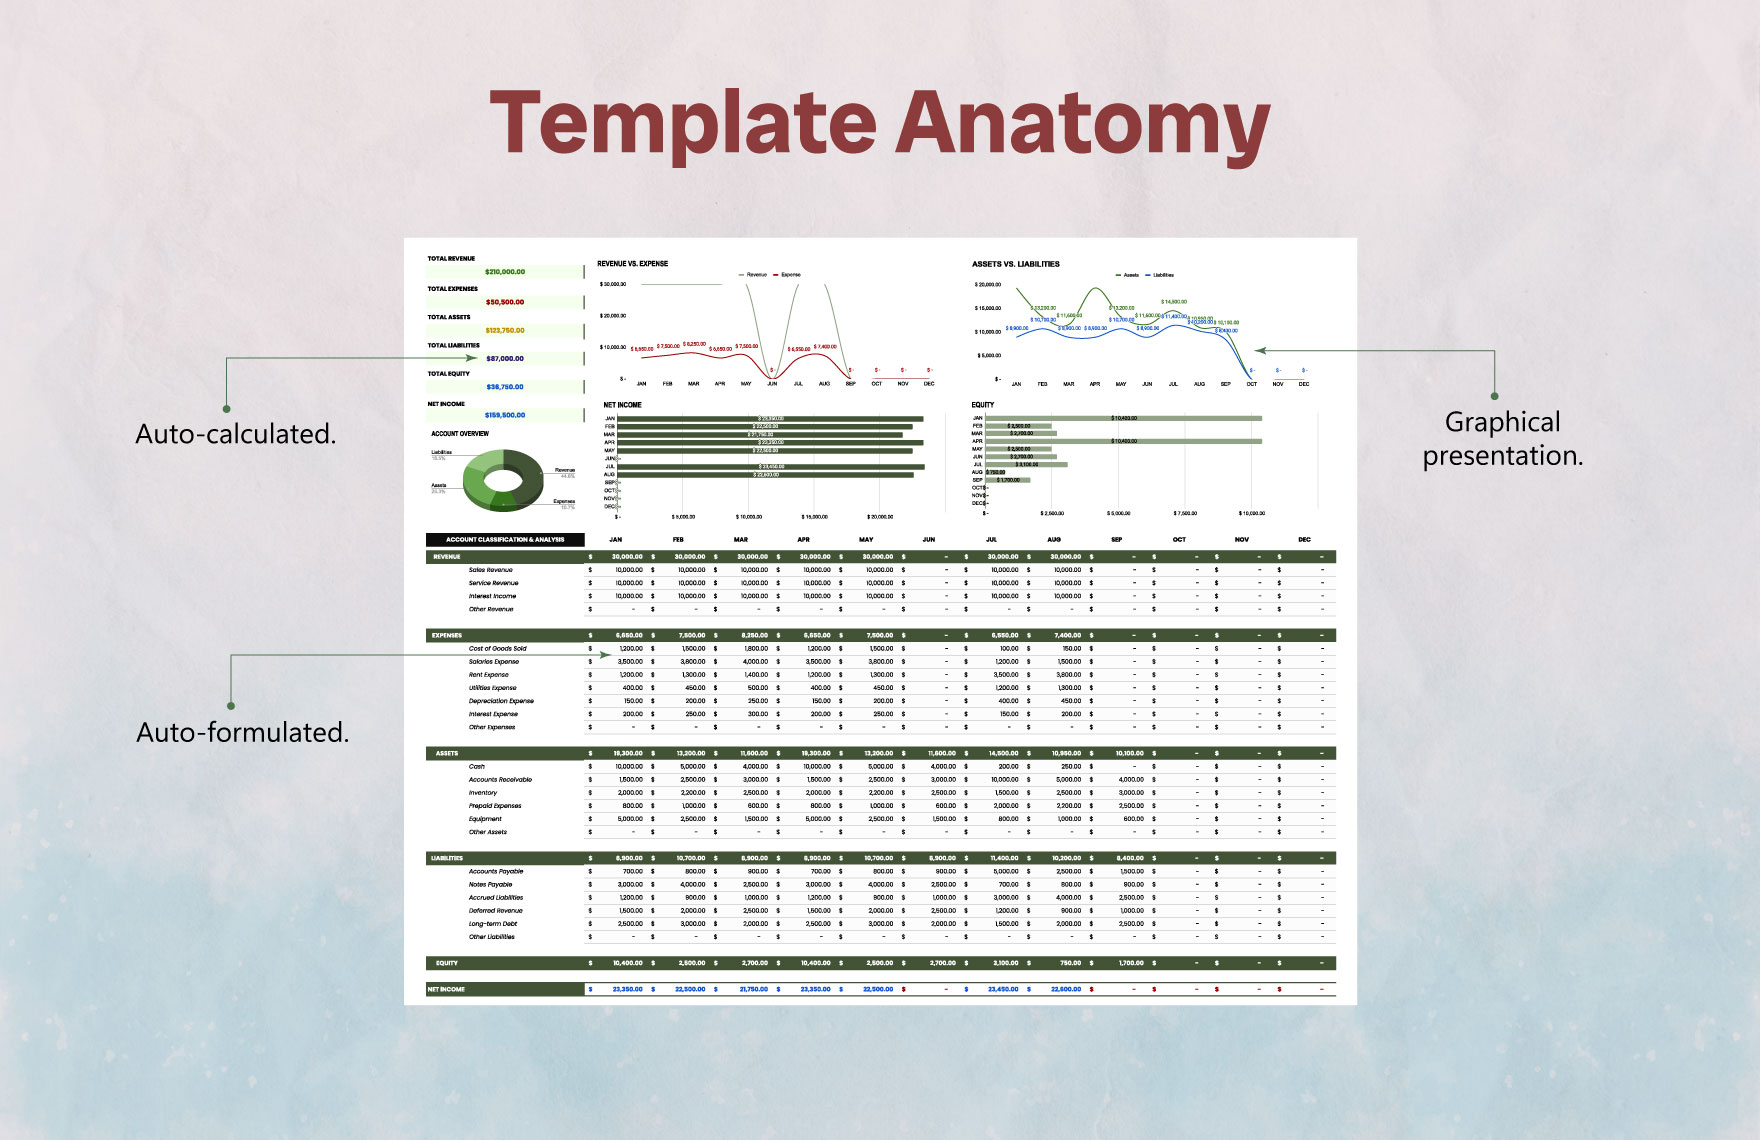 Account Classification and Analysis Template